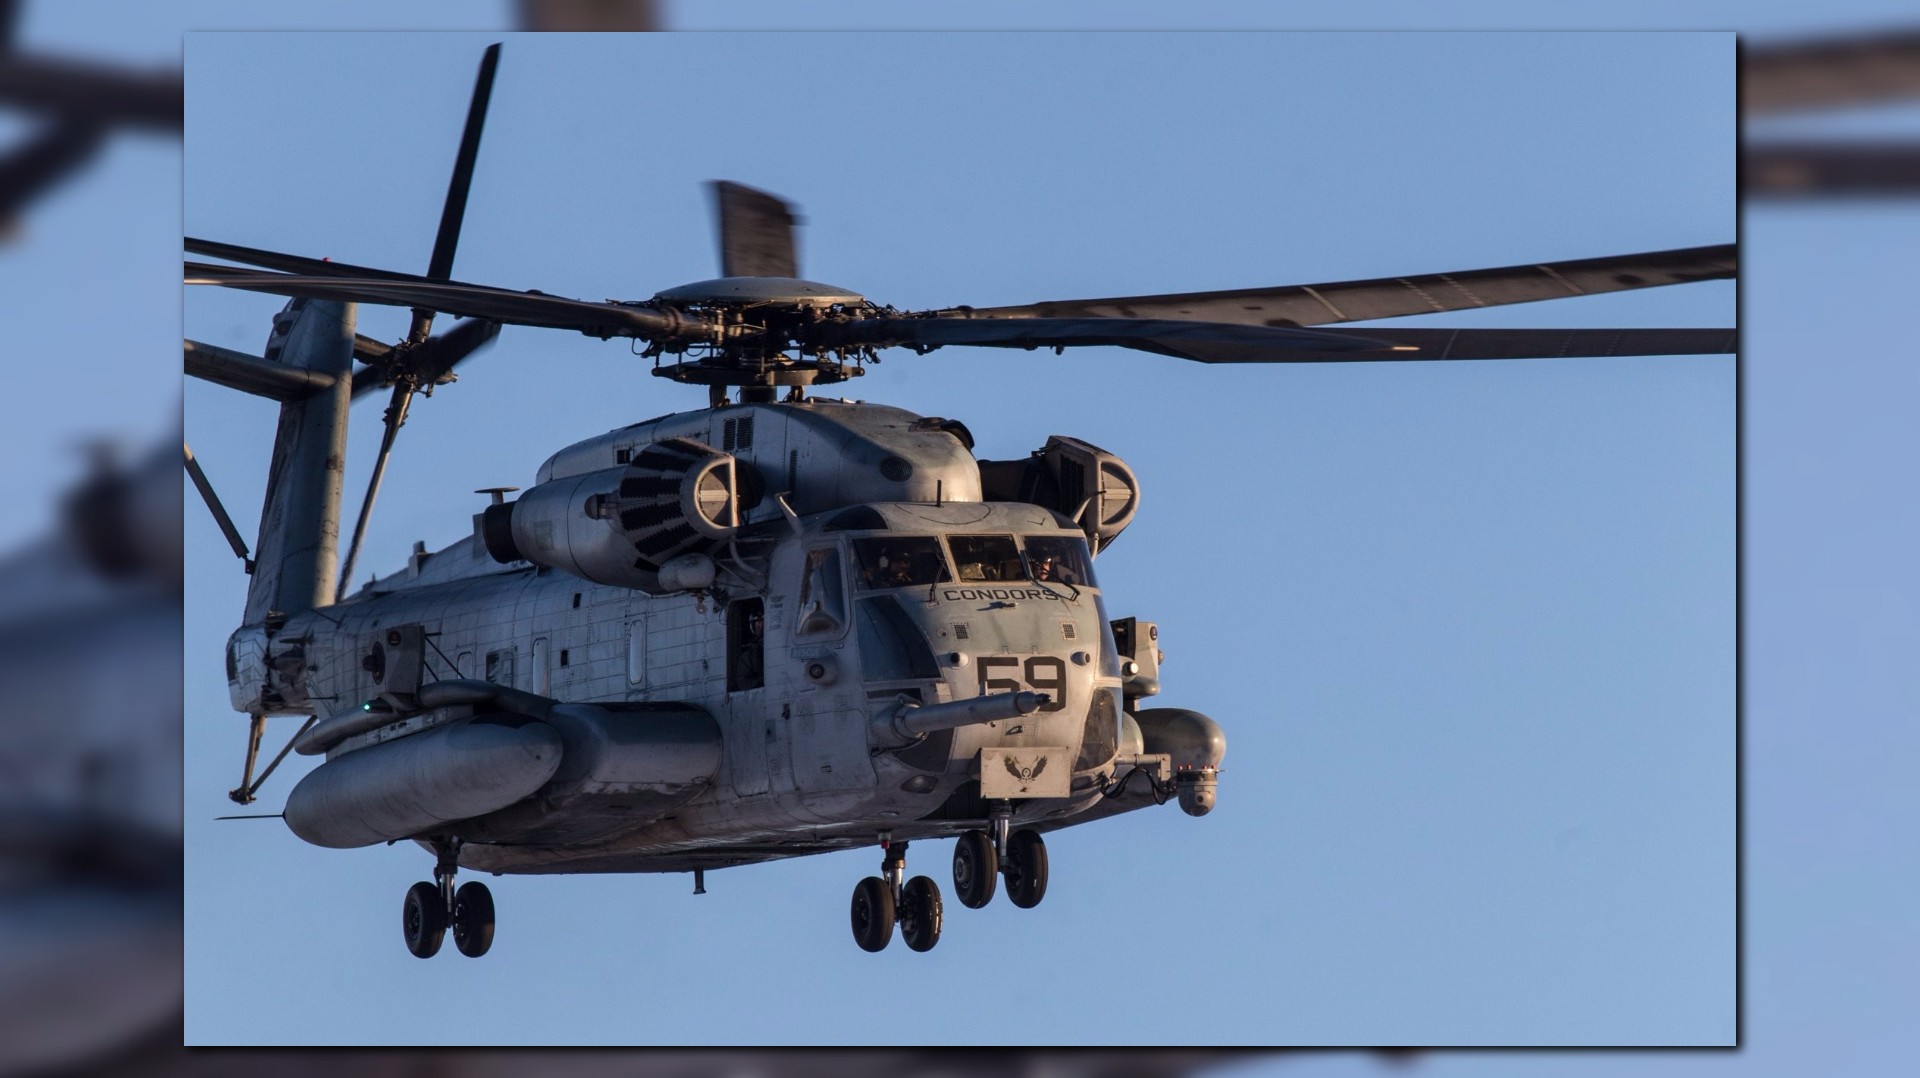 We finally know why military helicopters have been flying low around